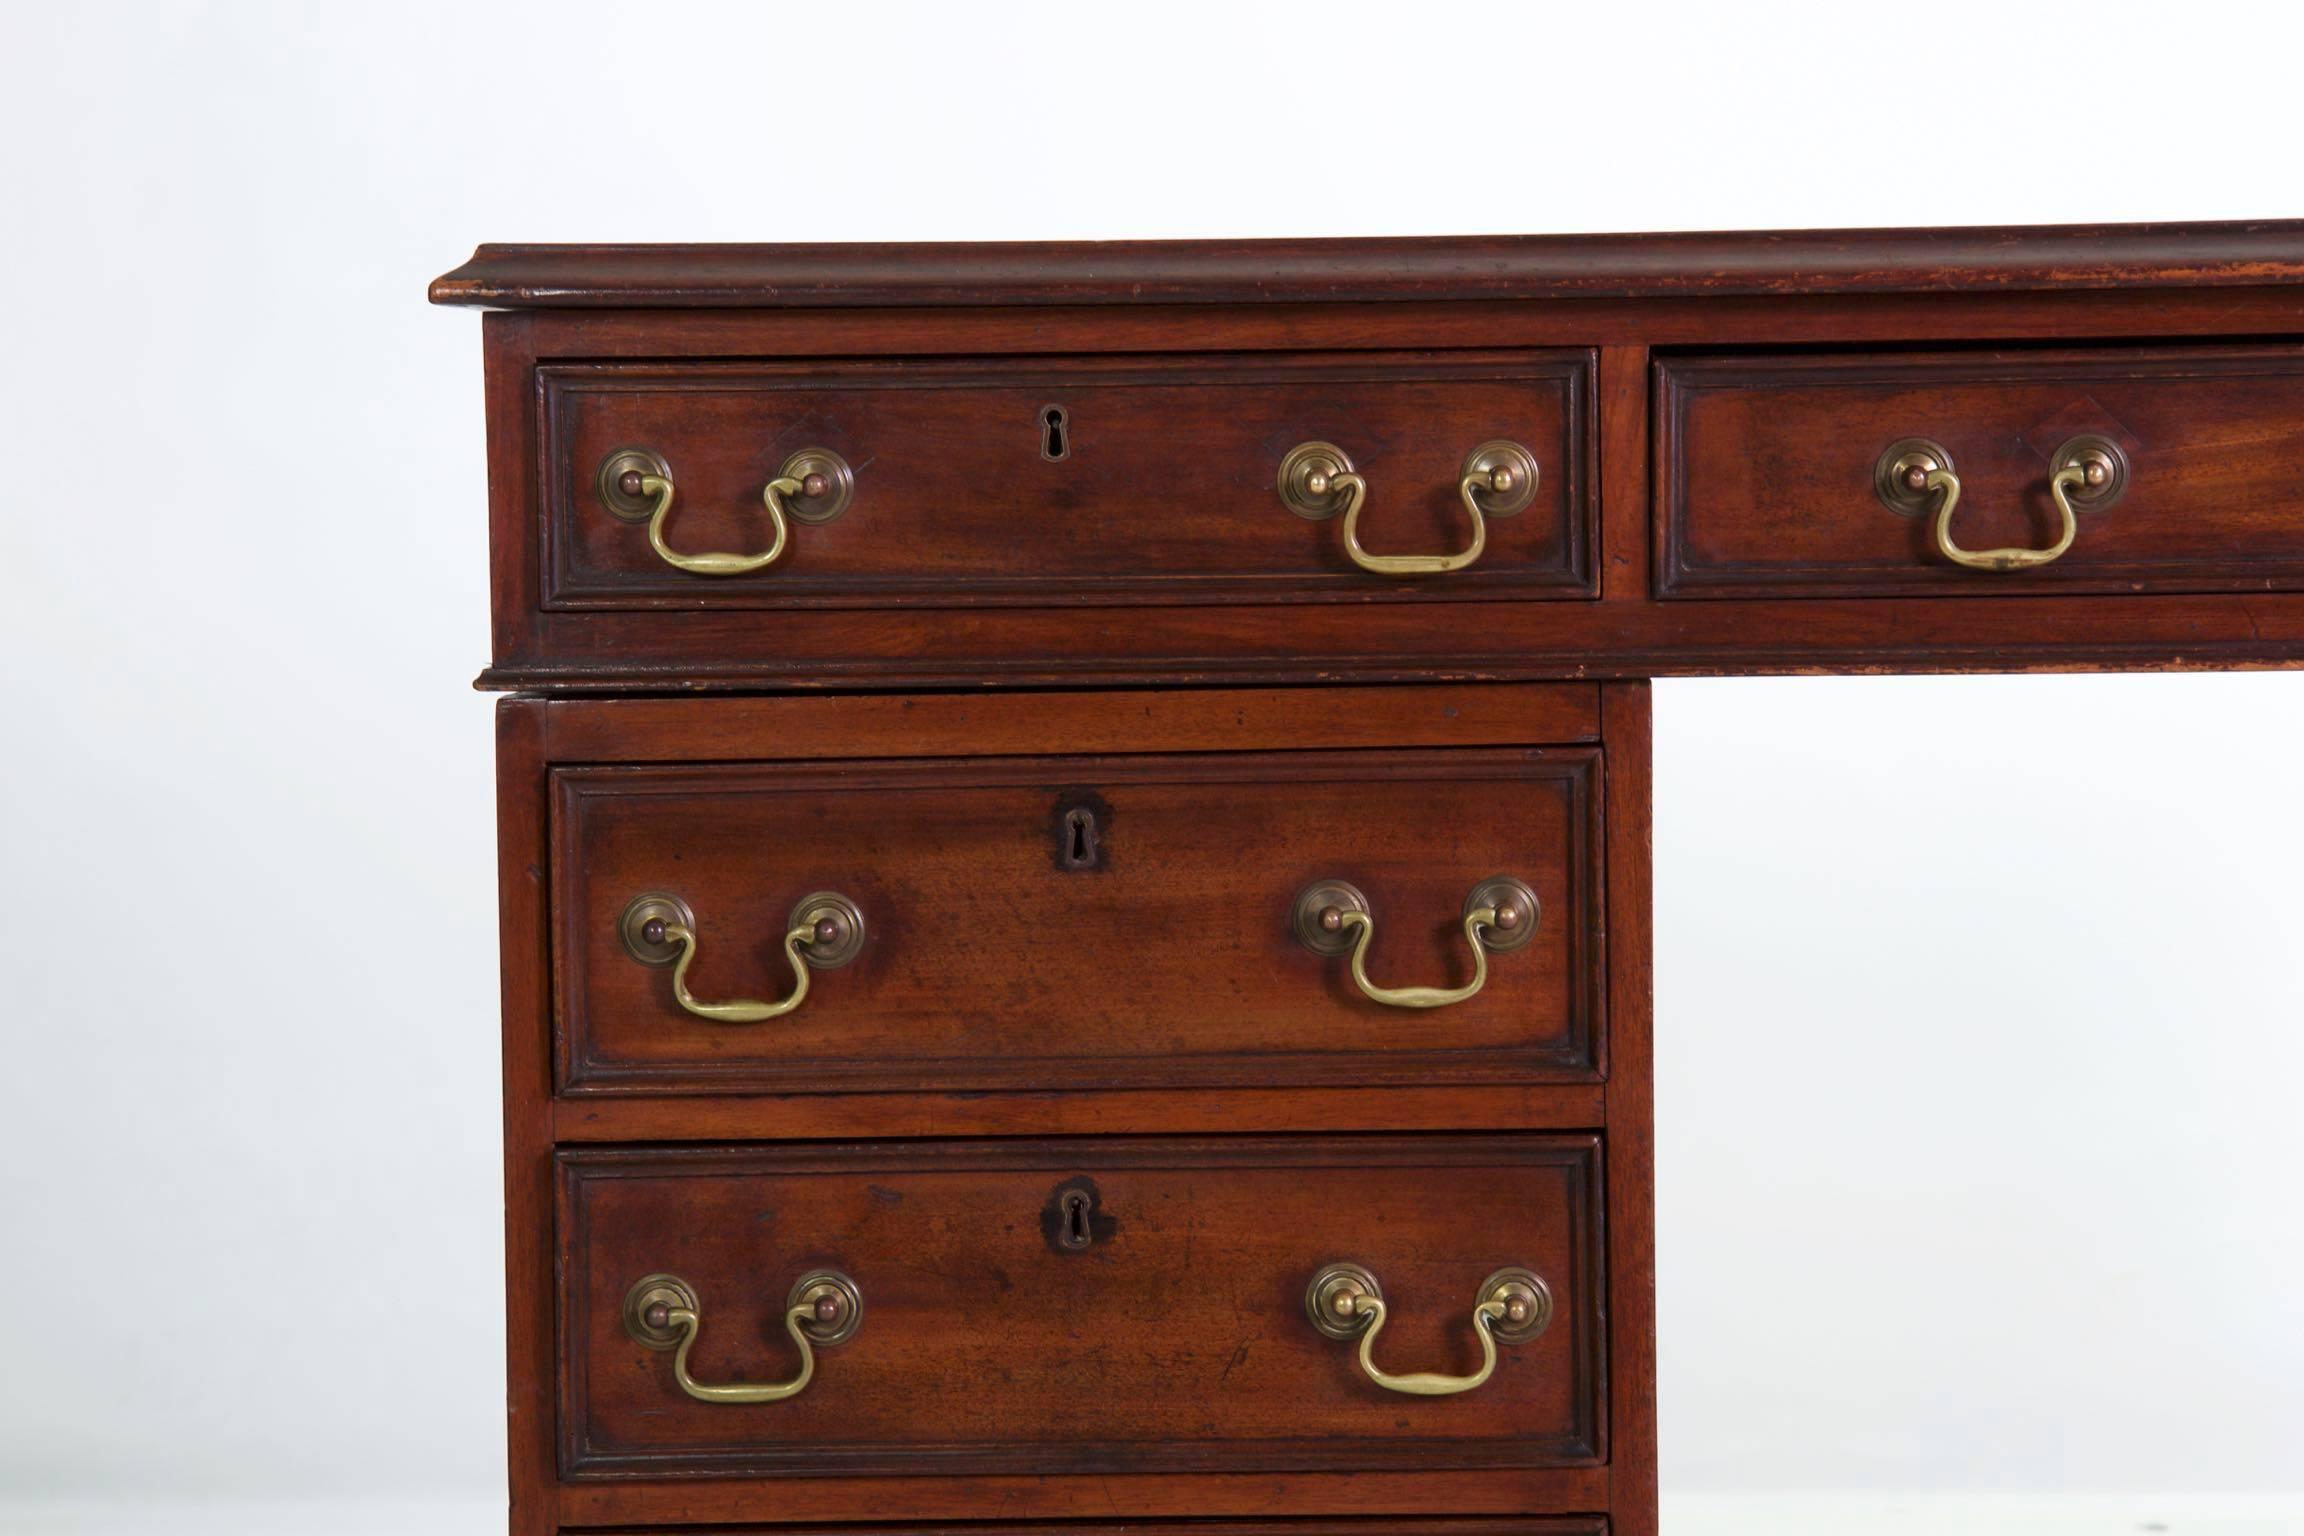 20th Century English George III Style Mahogany and Leather Antique Pedestal Desk (Britisch)